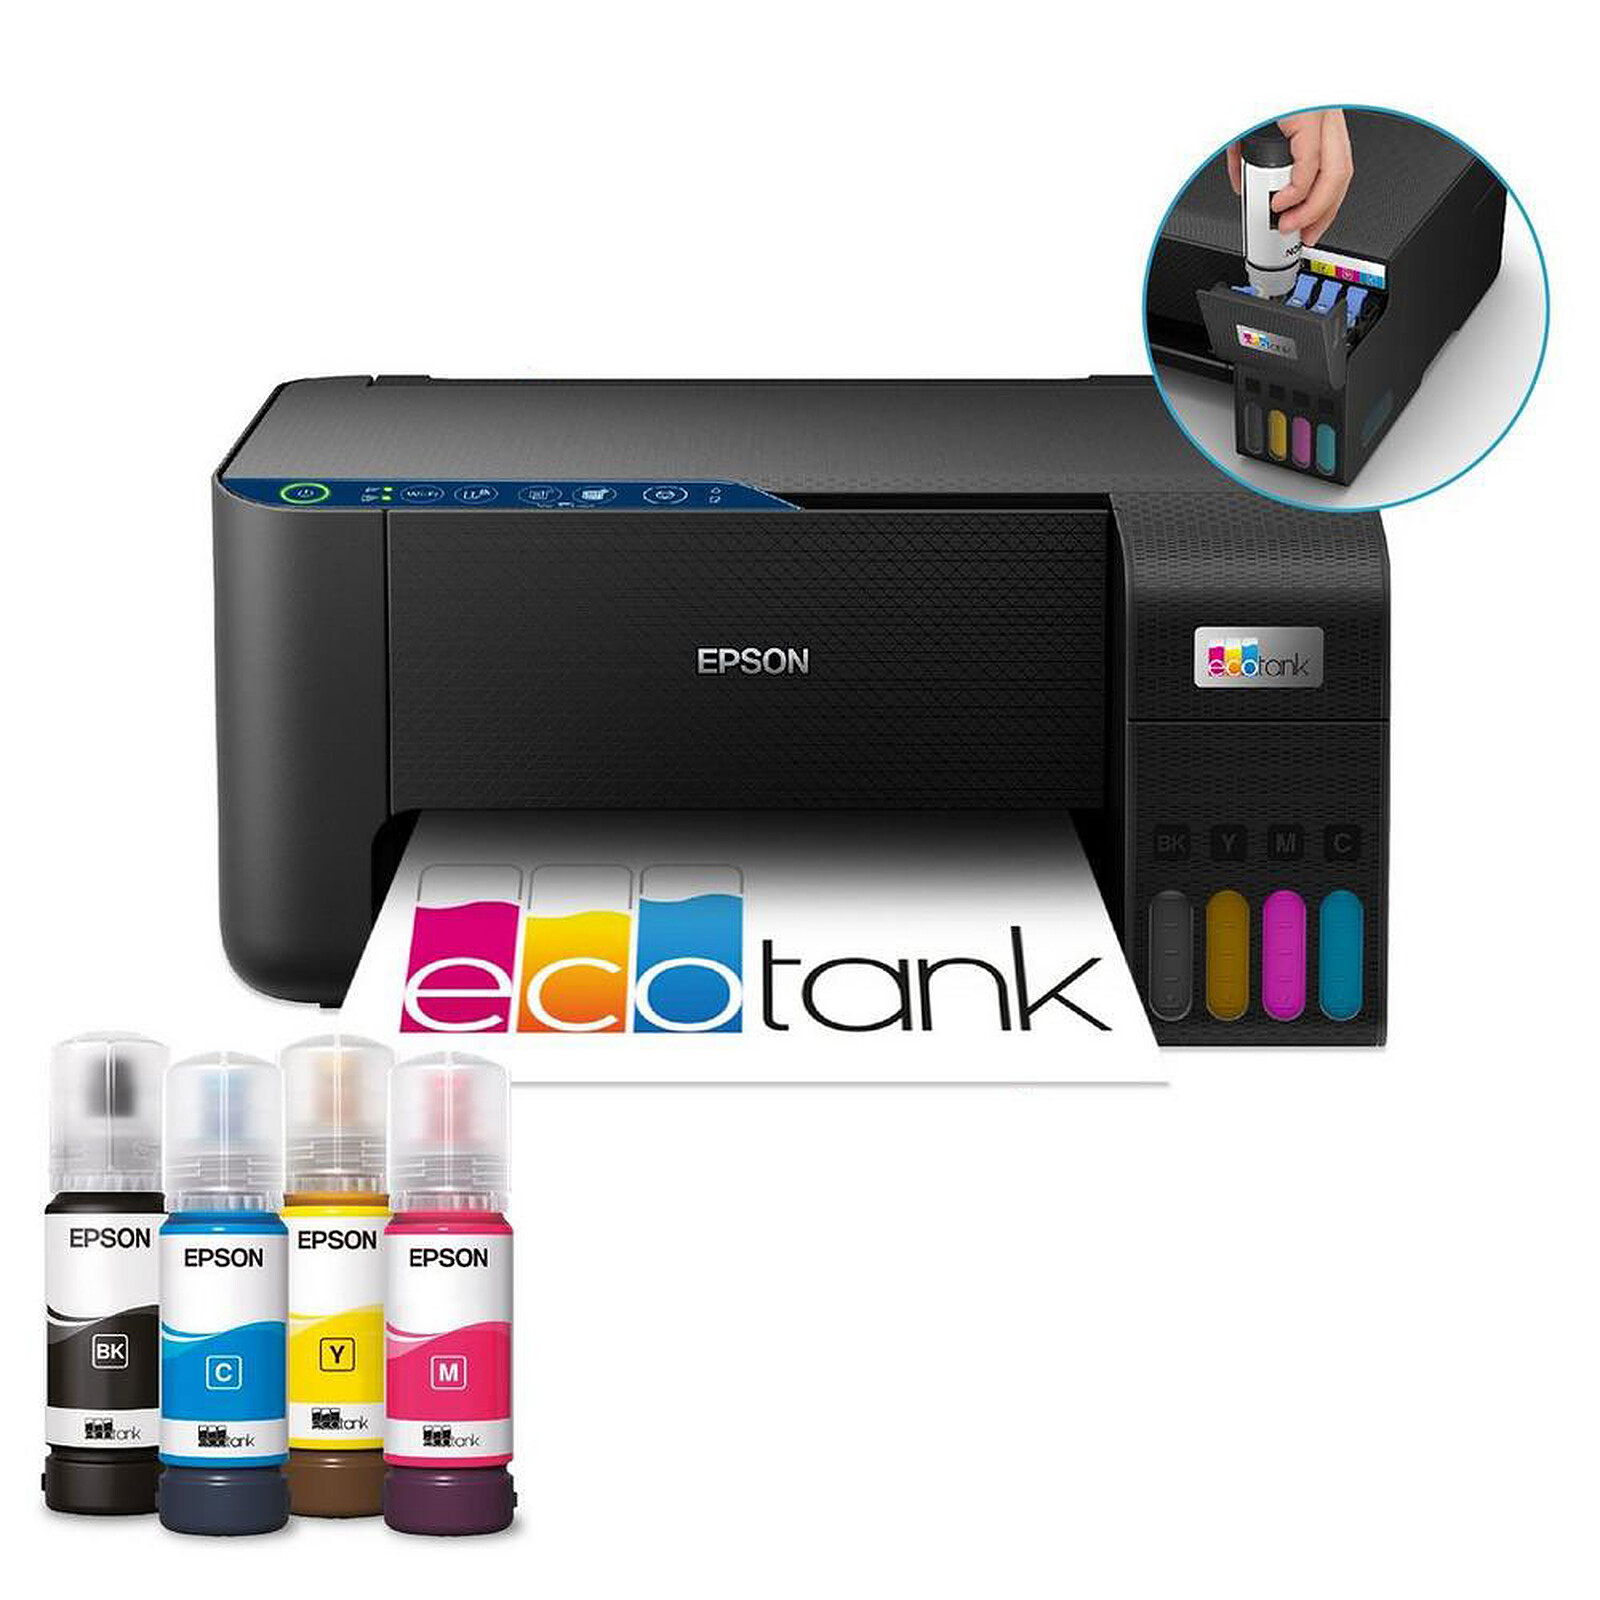 HP Smart Tank 7005 All In One - All-in-one printer - LDLC 3-year warranty